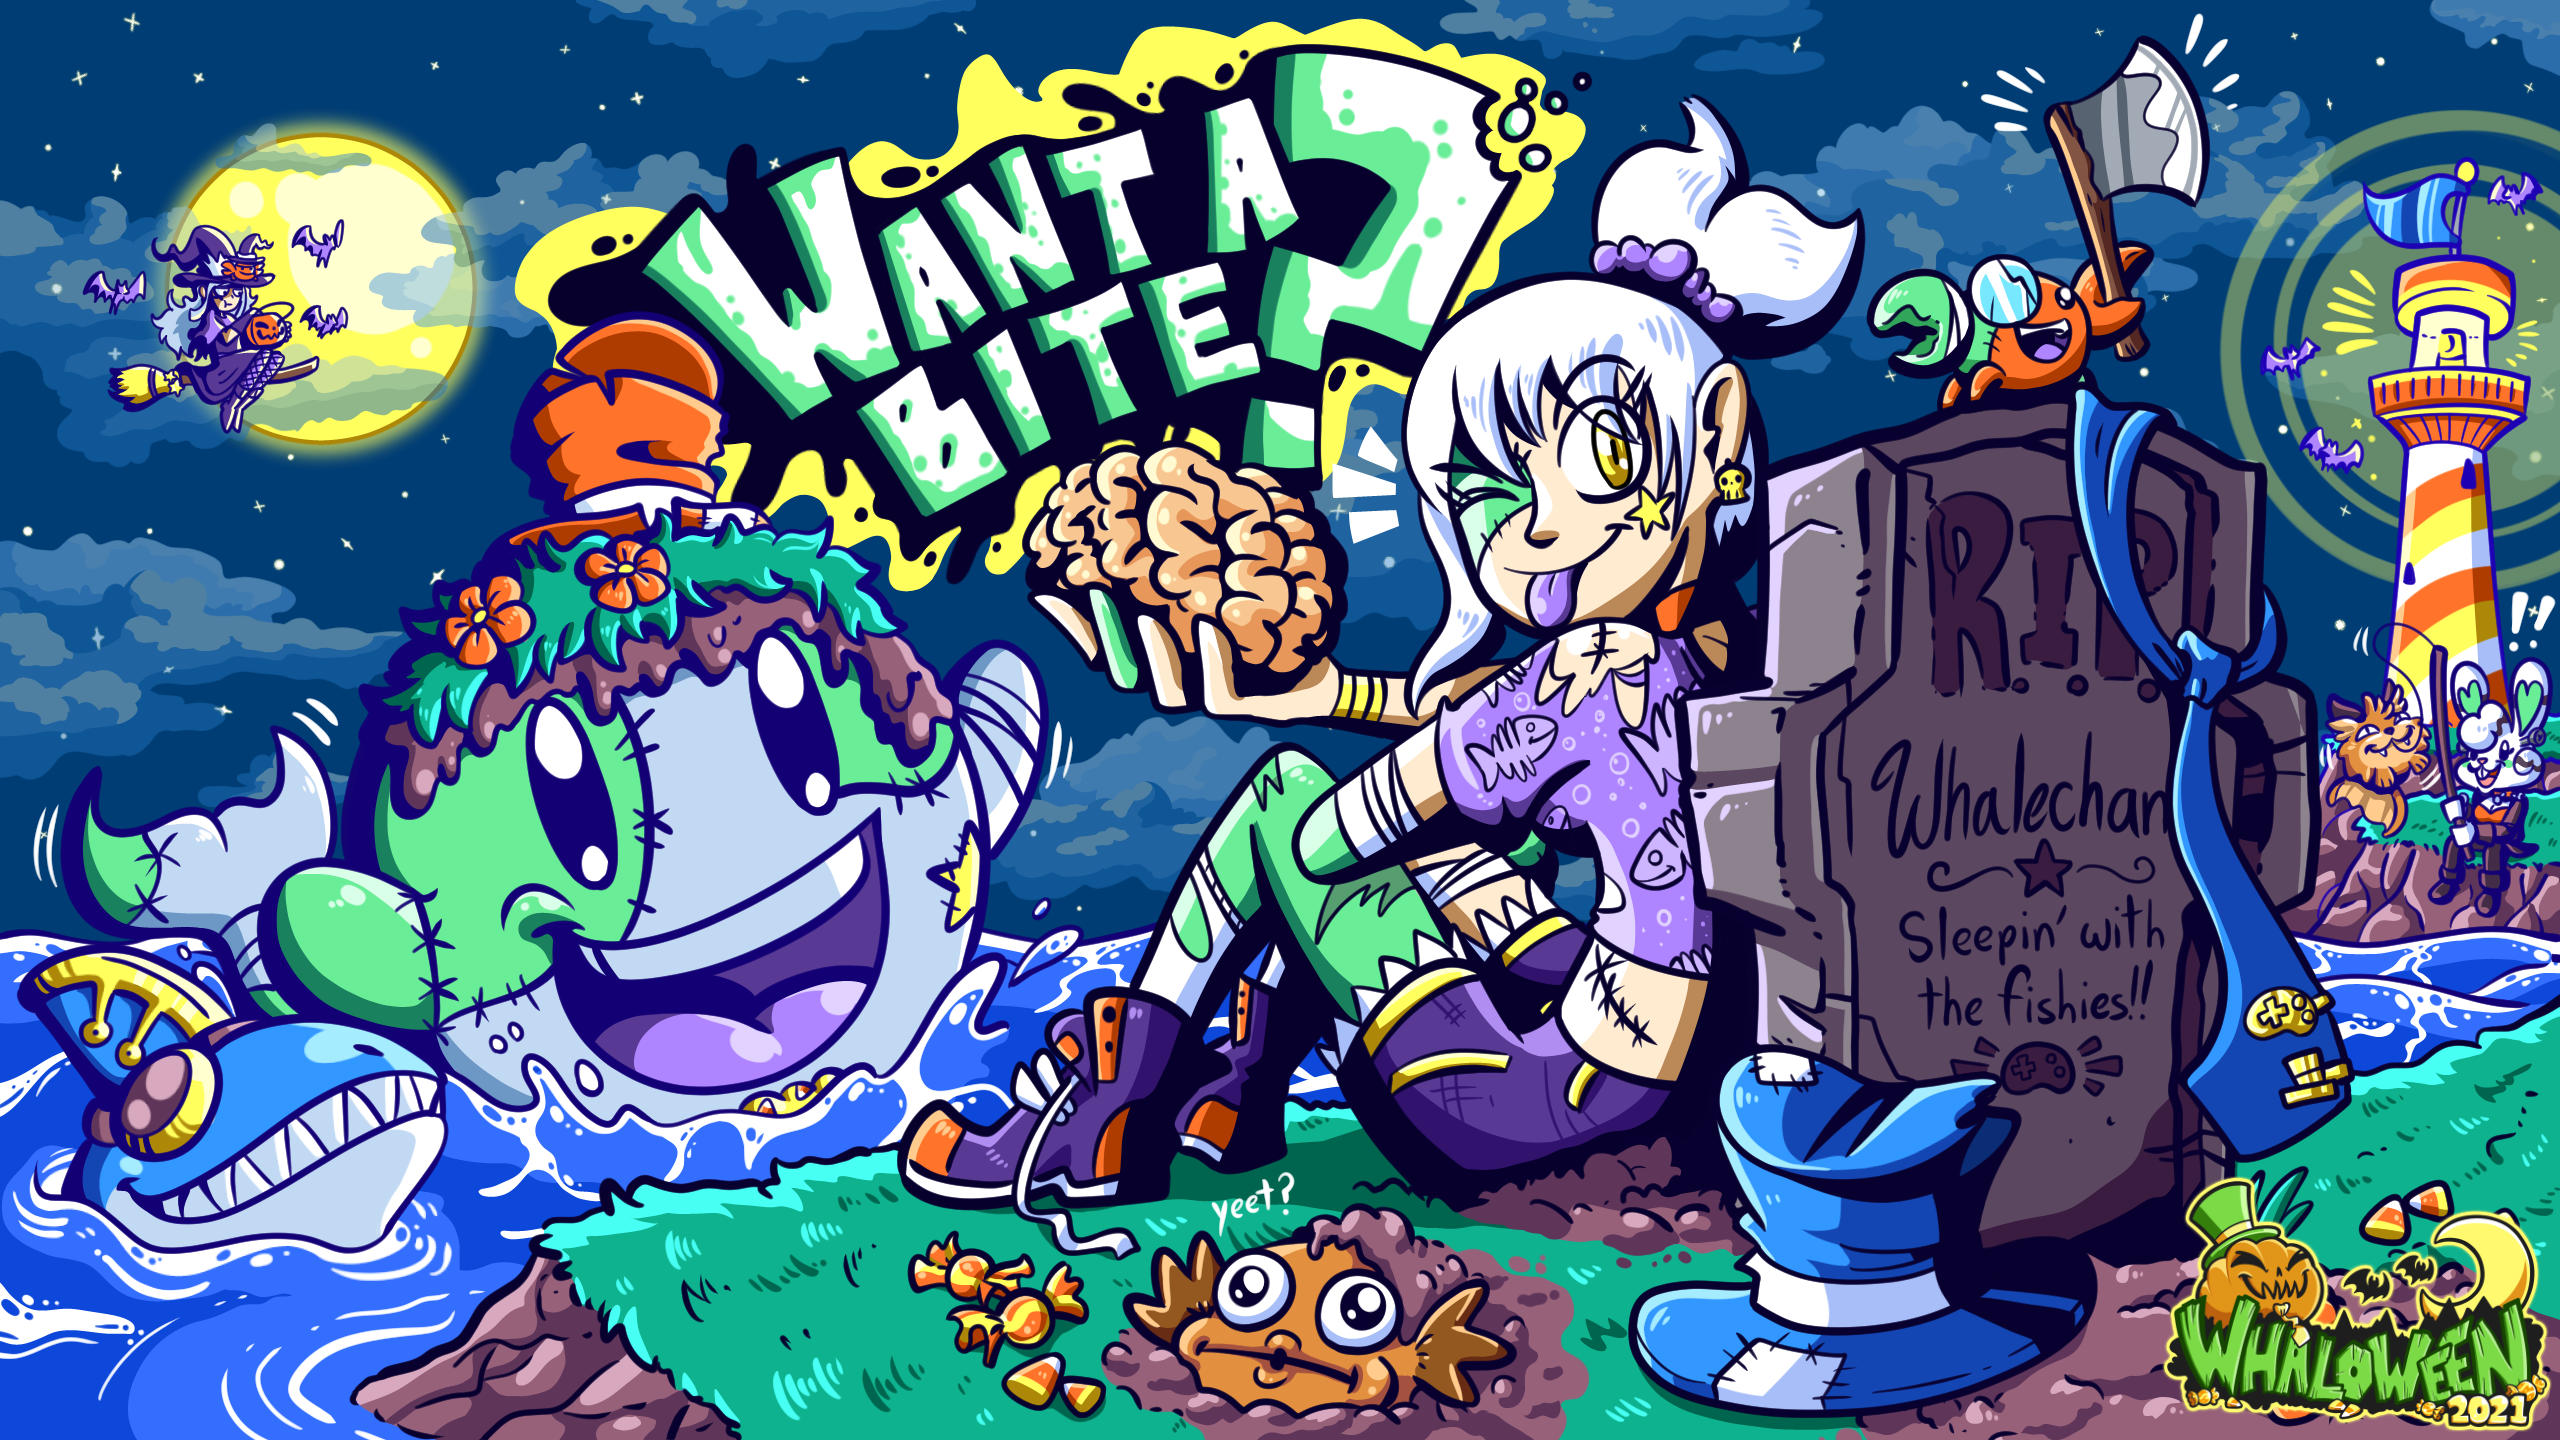 Whaloween is here! Whalechan and Polite have risen from their graves for snack time!